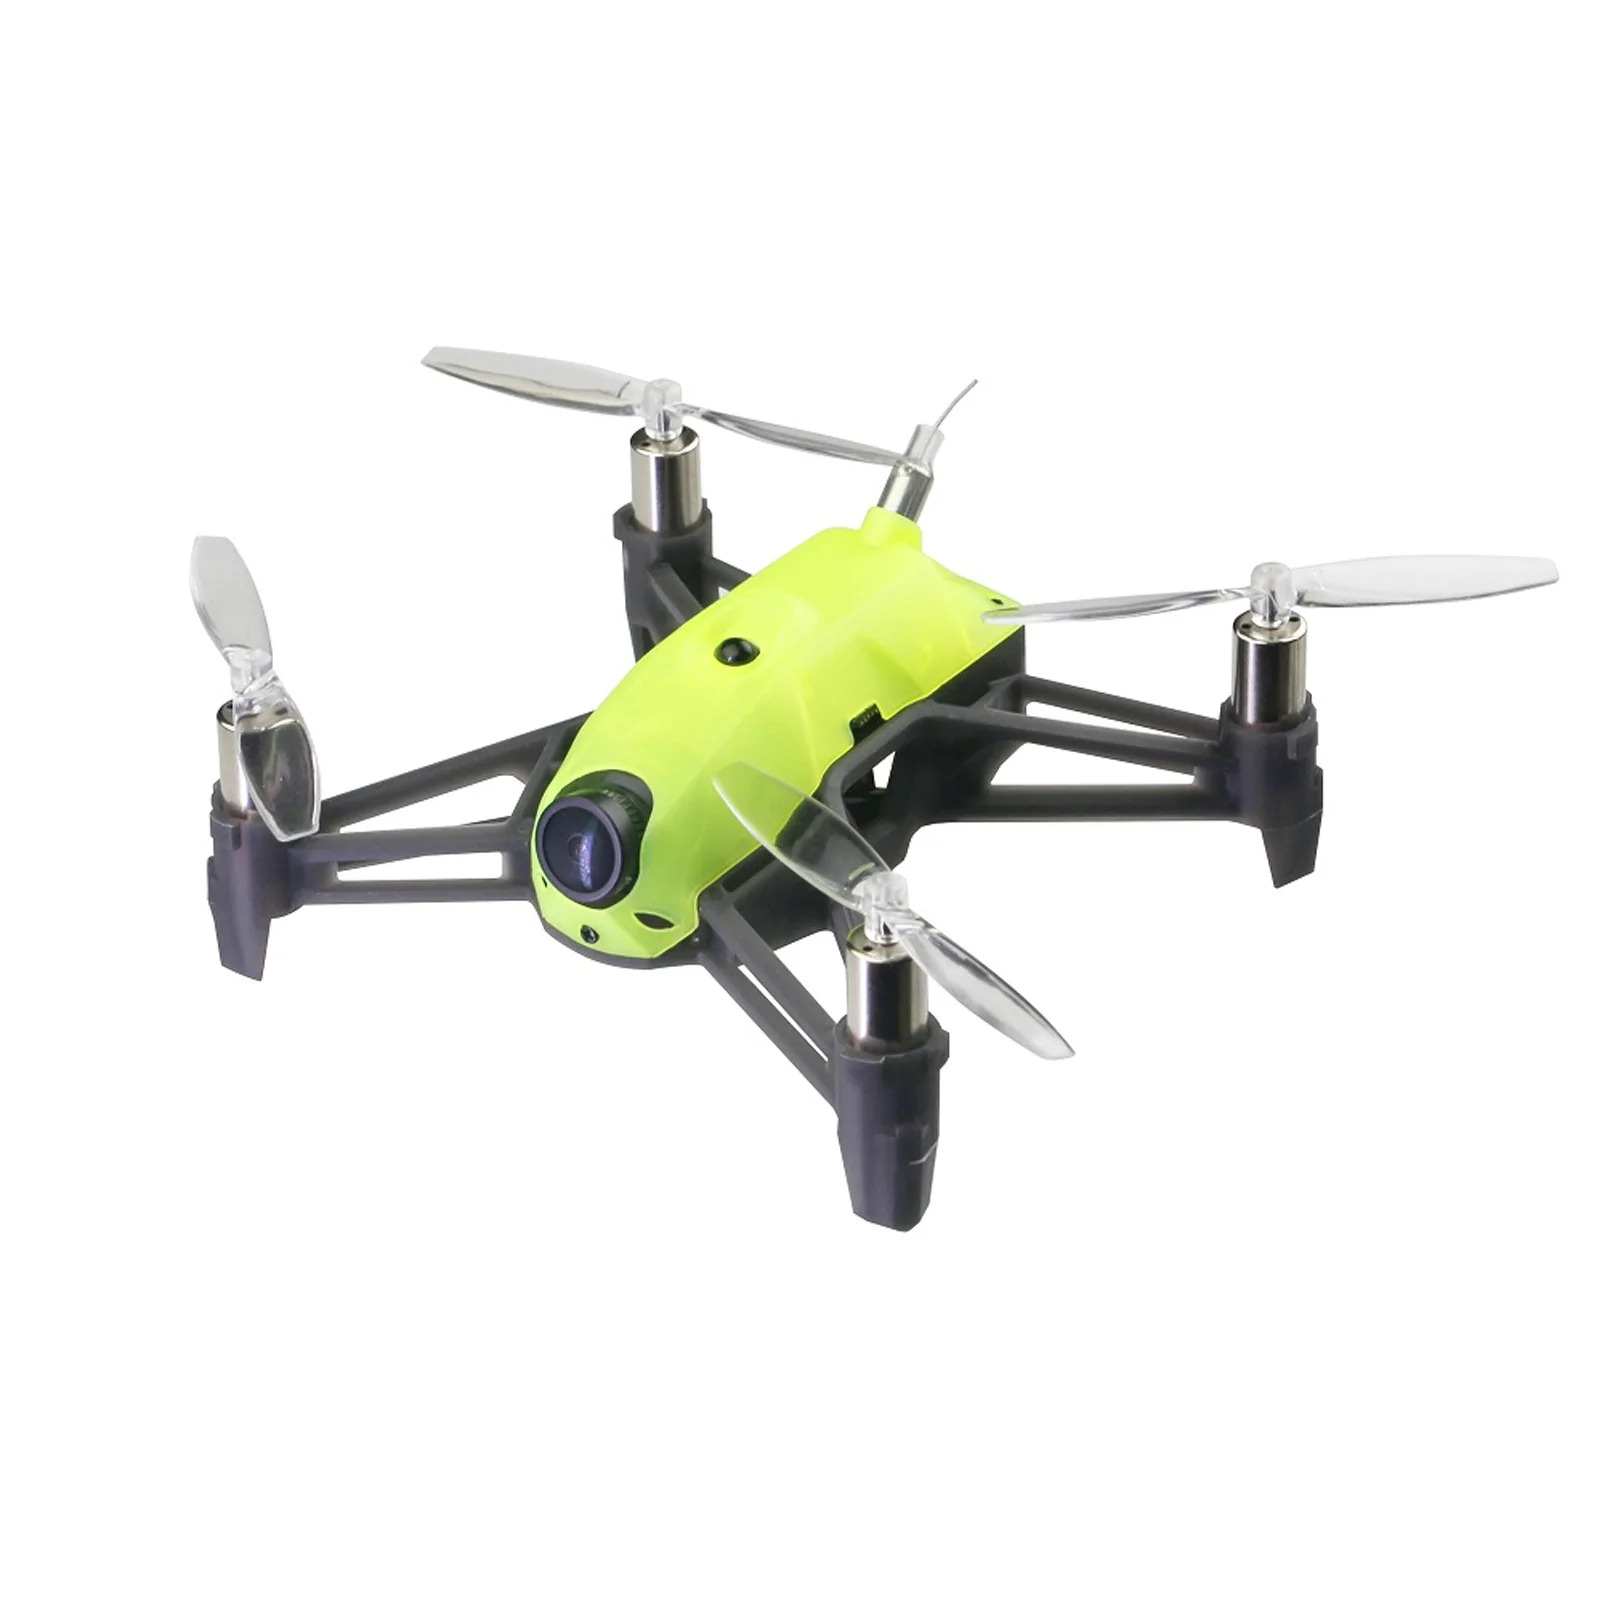 LDARC T11 FPV Racing Drone with EA8 Transmitter